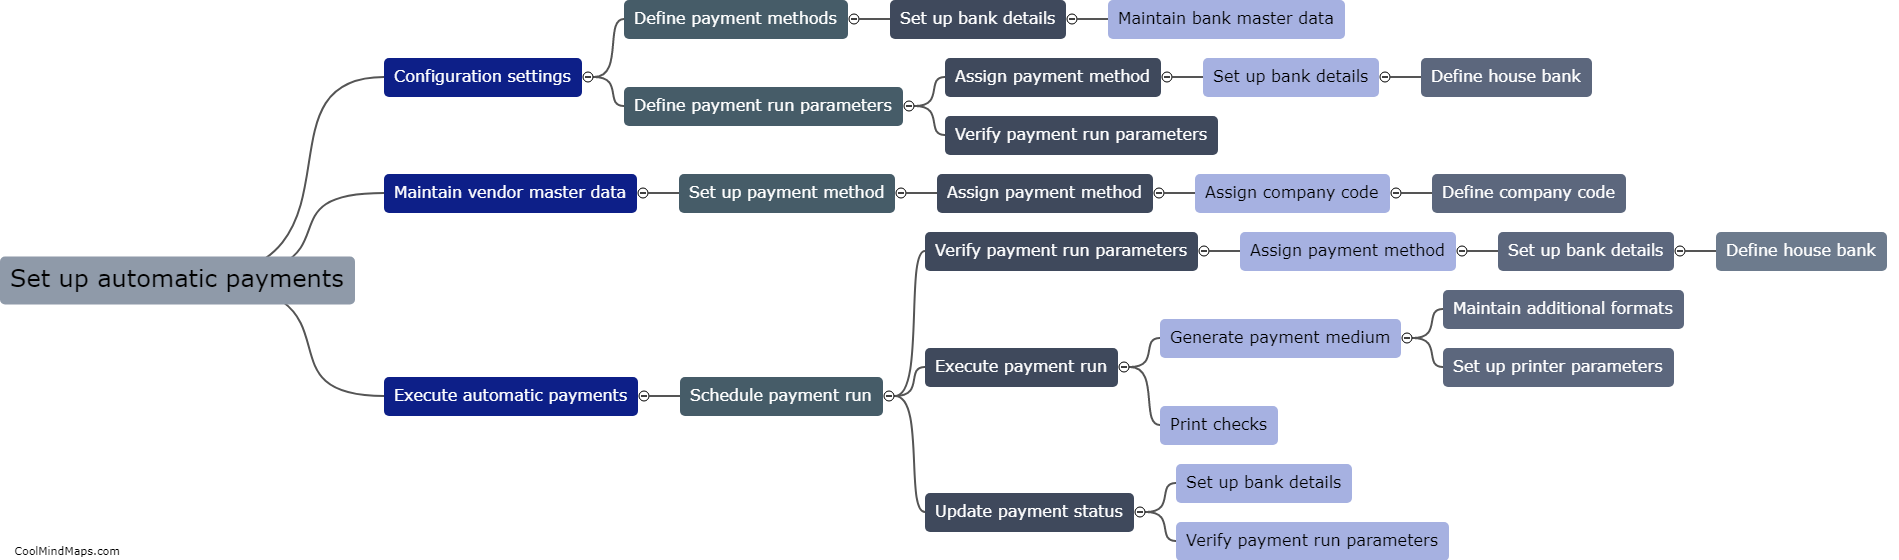 How to set up automatic payments in SAP?